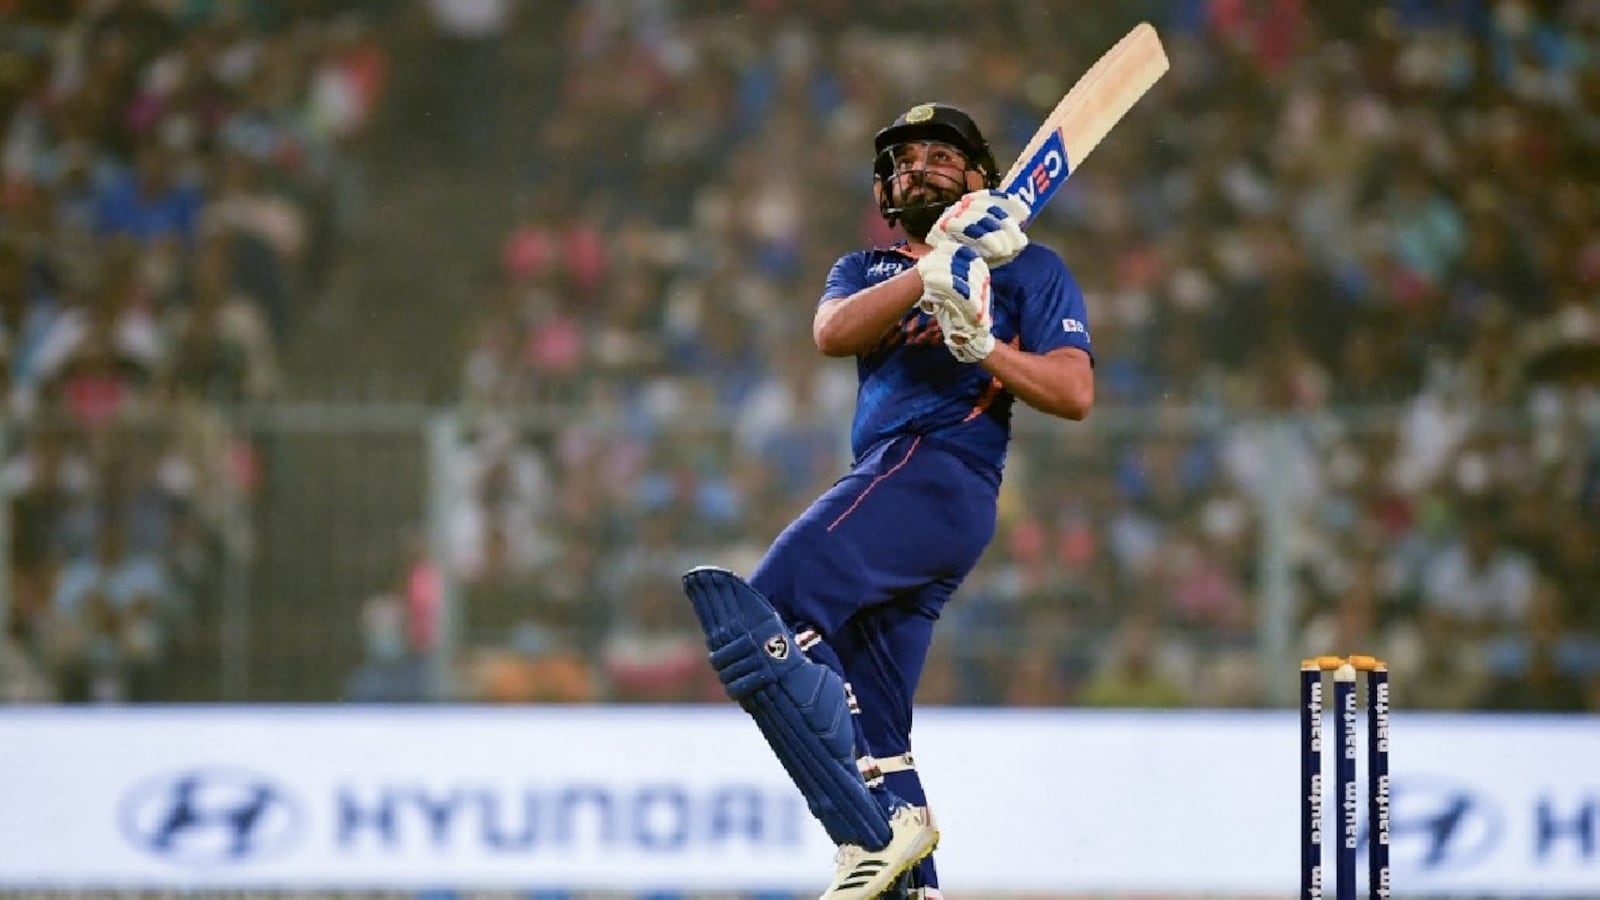 Analysis: Is 'high-risk' approach Rohit Sharma's Achilles heel?